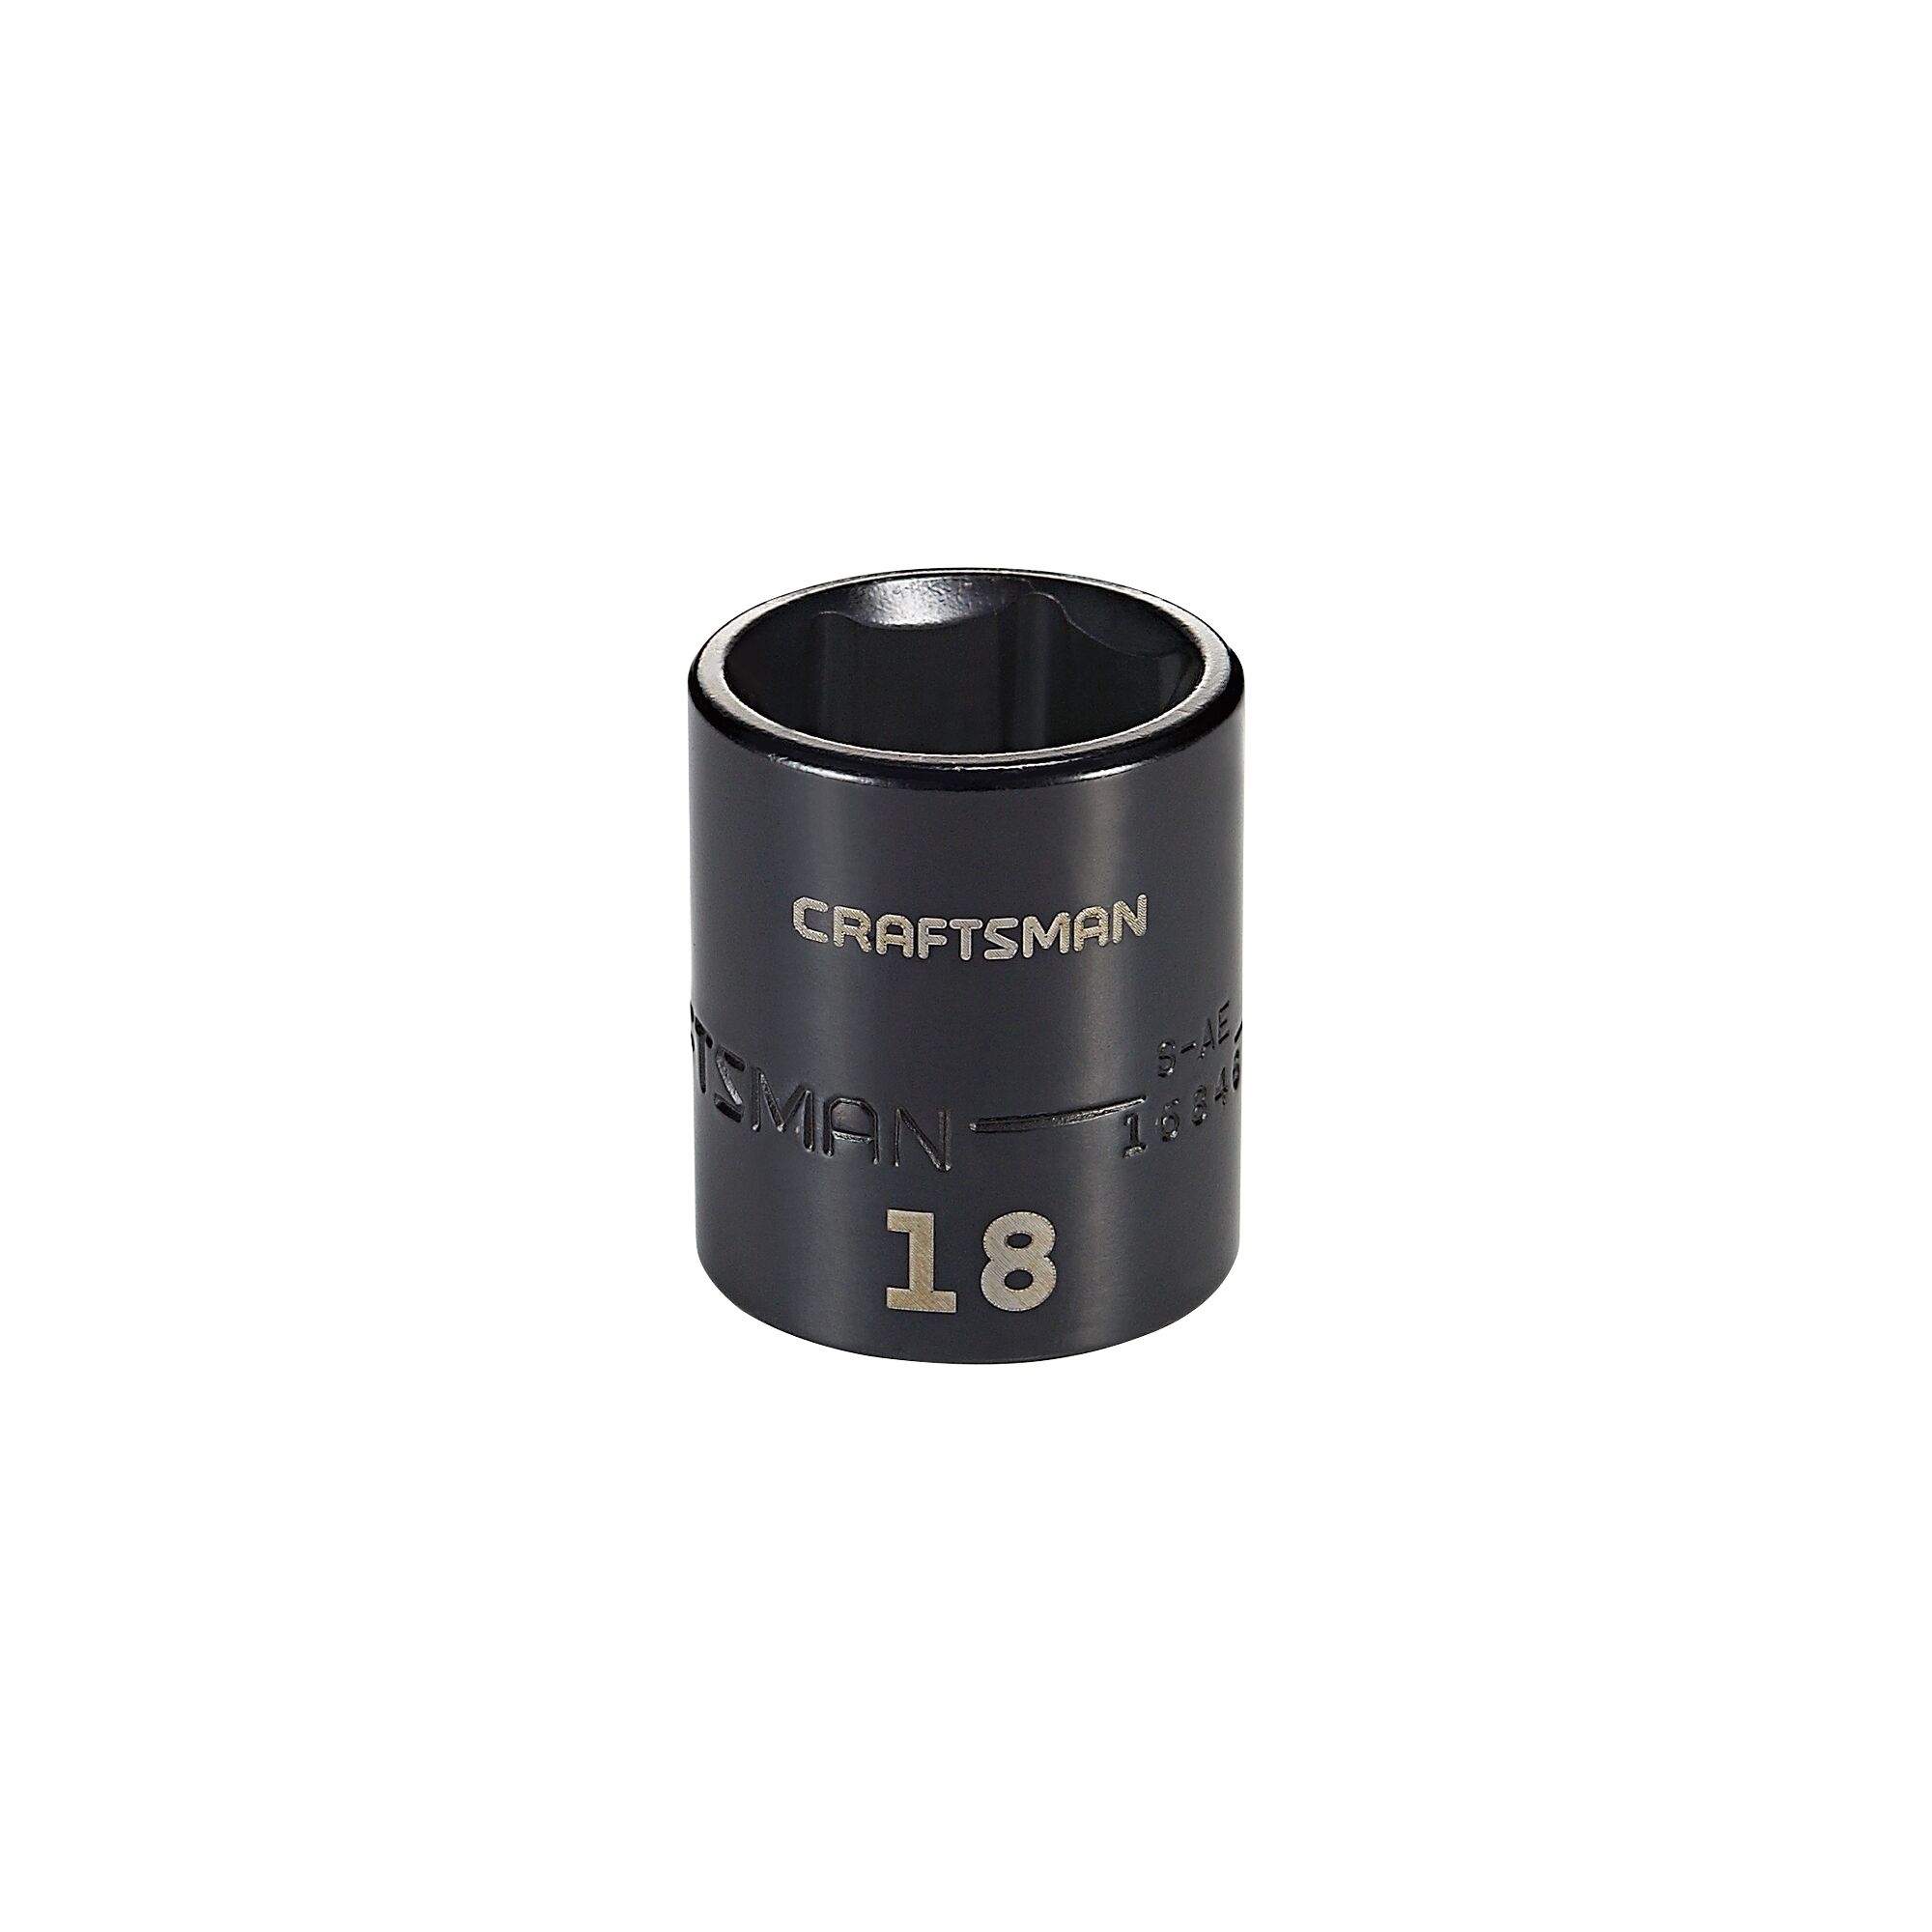 3 eighths inch 18 millimeter metric impact shallow socket.